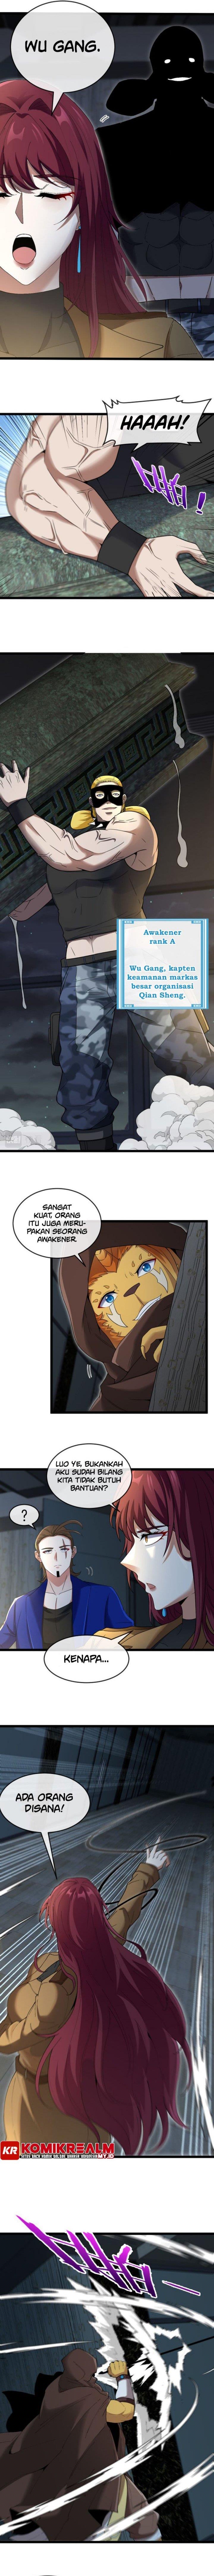 The Golden Lion King Chapter 7